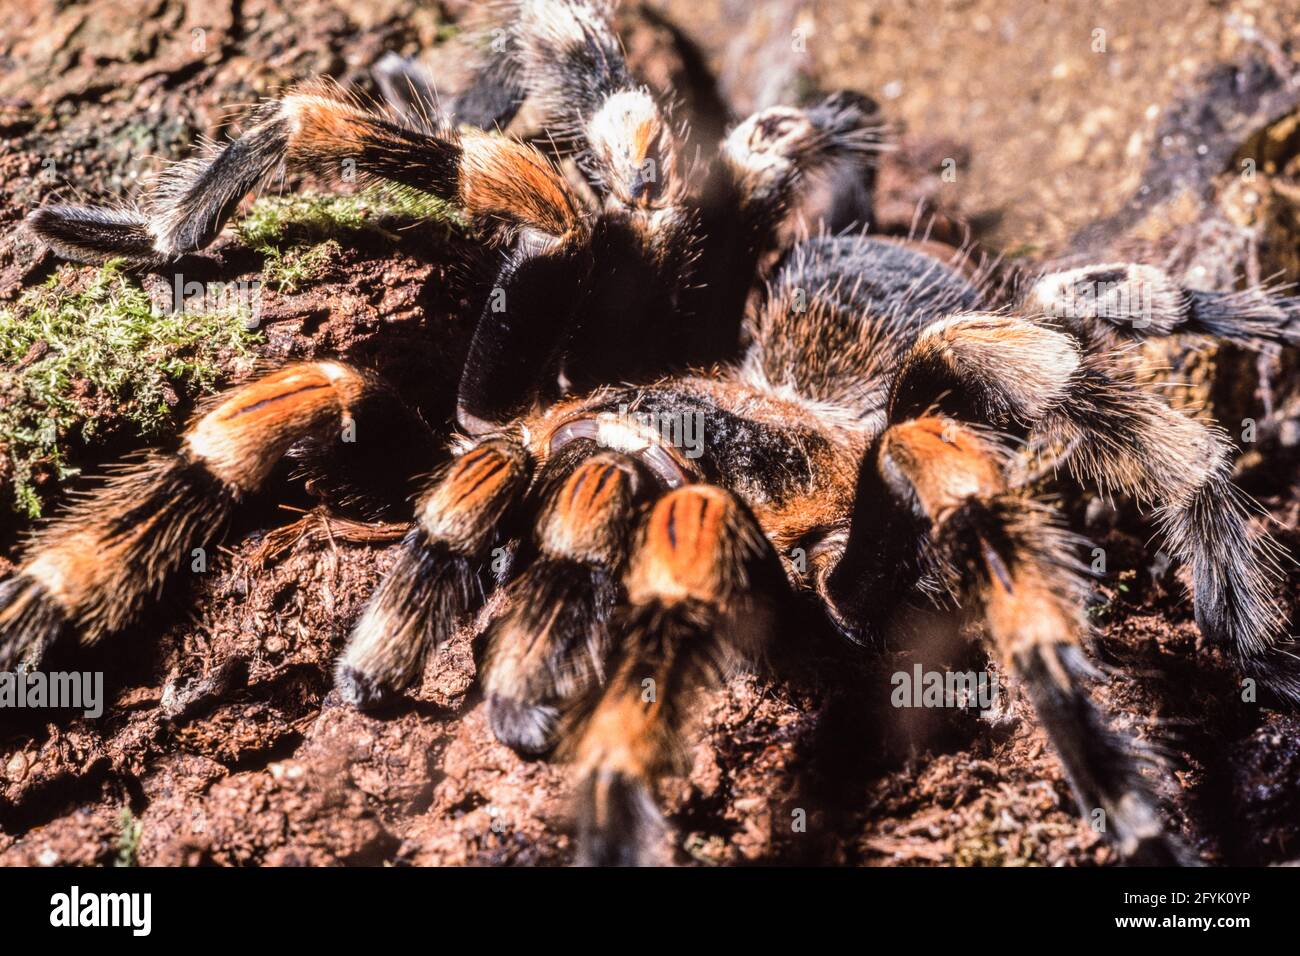 A Mexican Redknee Tarantula in the London Zoo.  Native to deserts and scrublands of Mexico.  Can live up to 20 years. Stock Photo